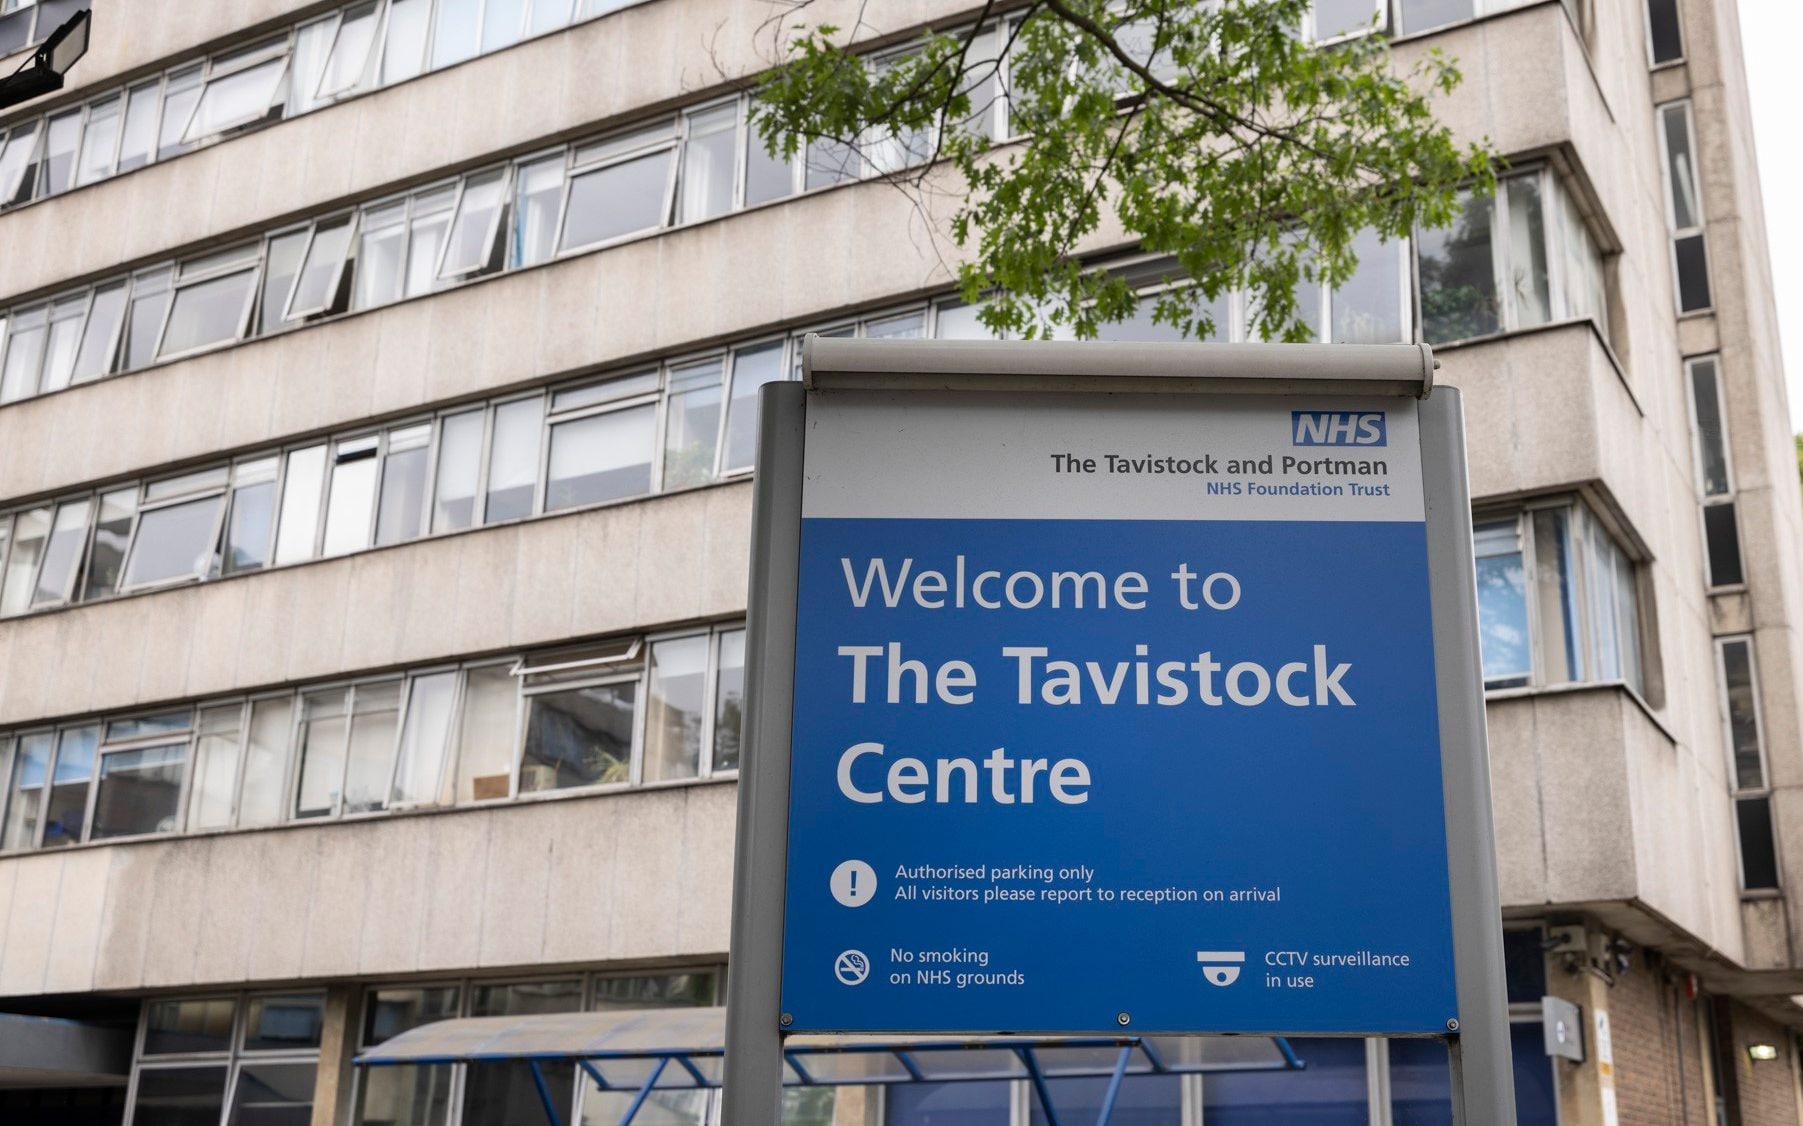 how the void left by the tavistock is being filled by the private sector